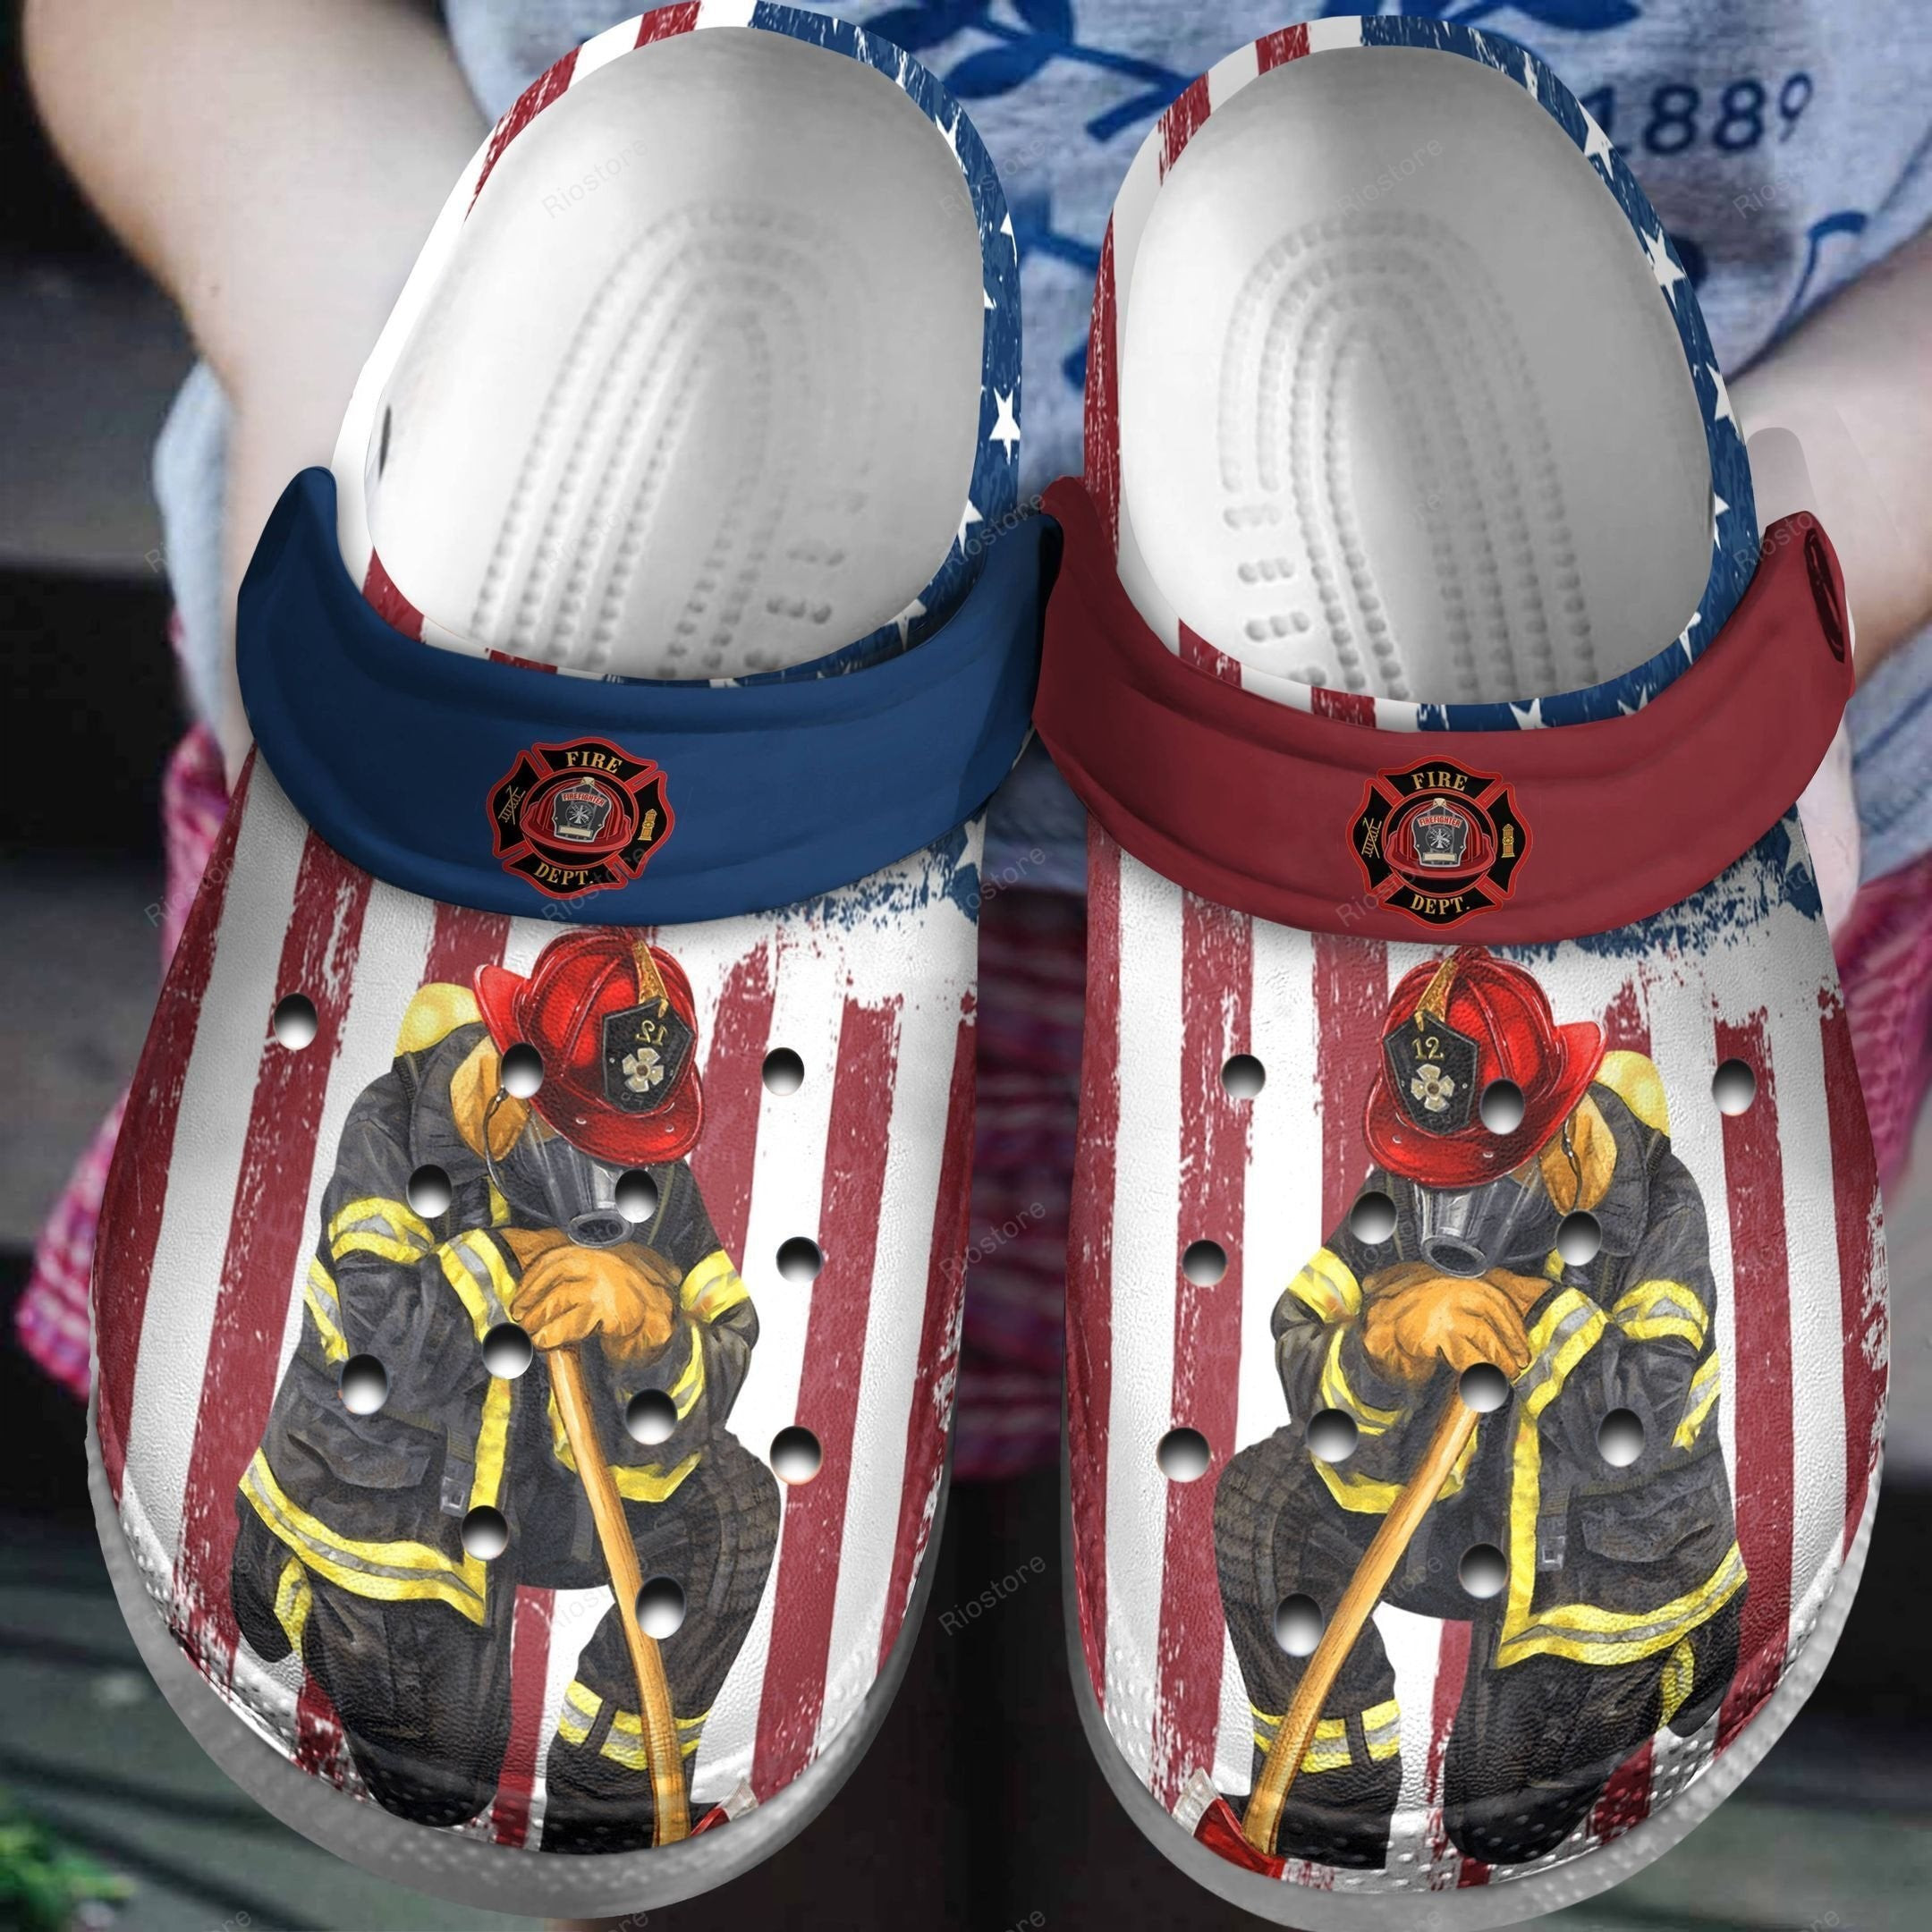 Firefighter Usa Shoes - Fire Dept Crocs Clogs Gifts For Father Day